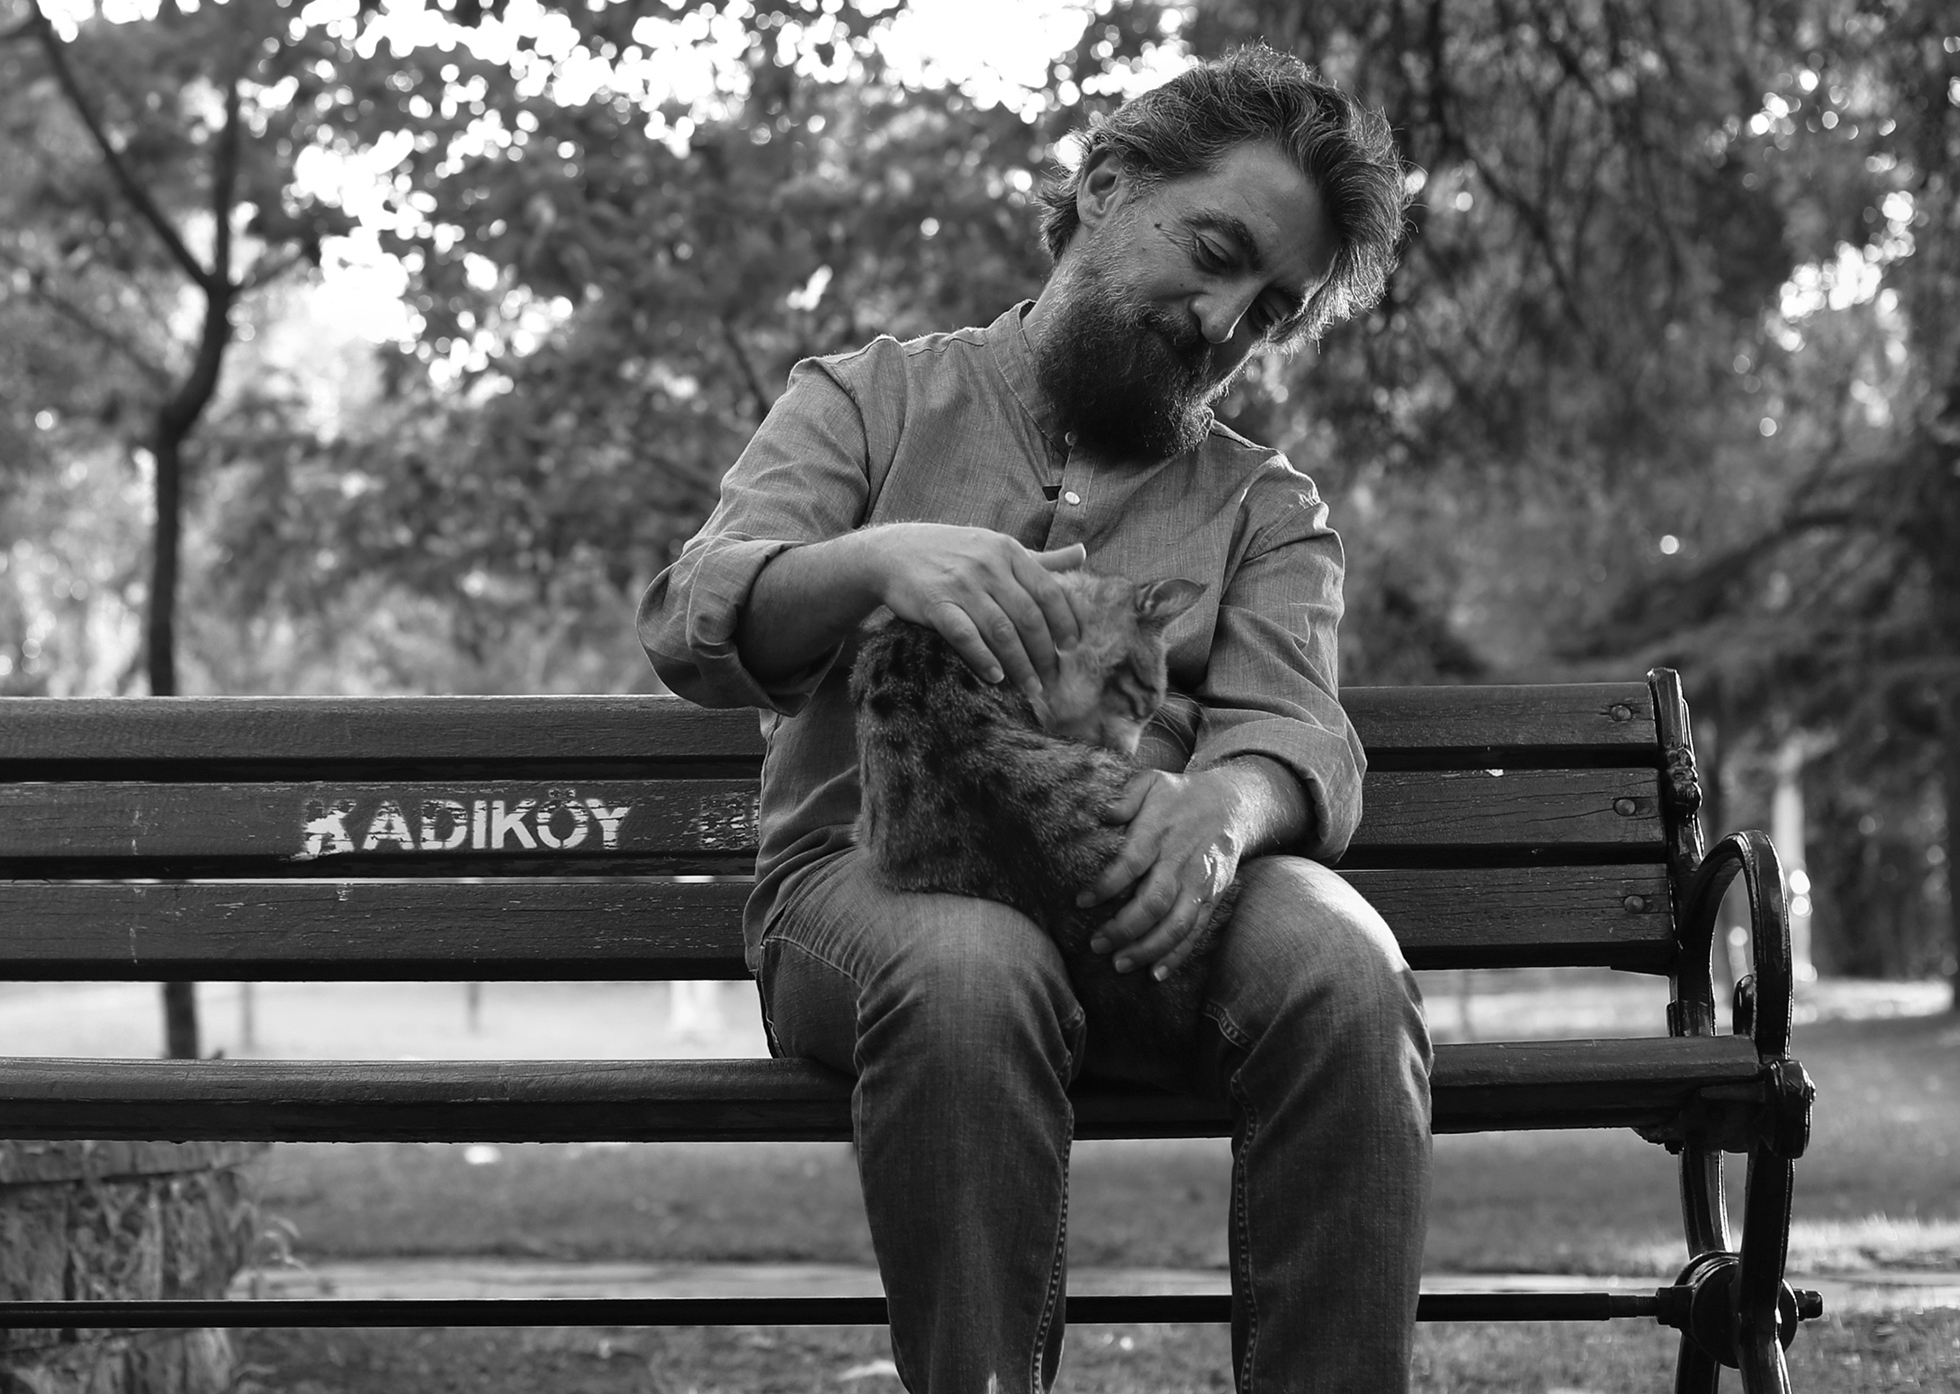 Güven Güzeldere sits on a park bench in Istanbul and pets the cat on his lap.